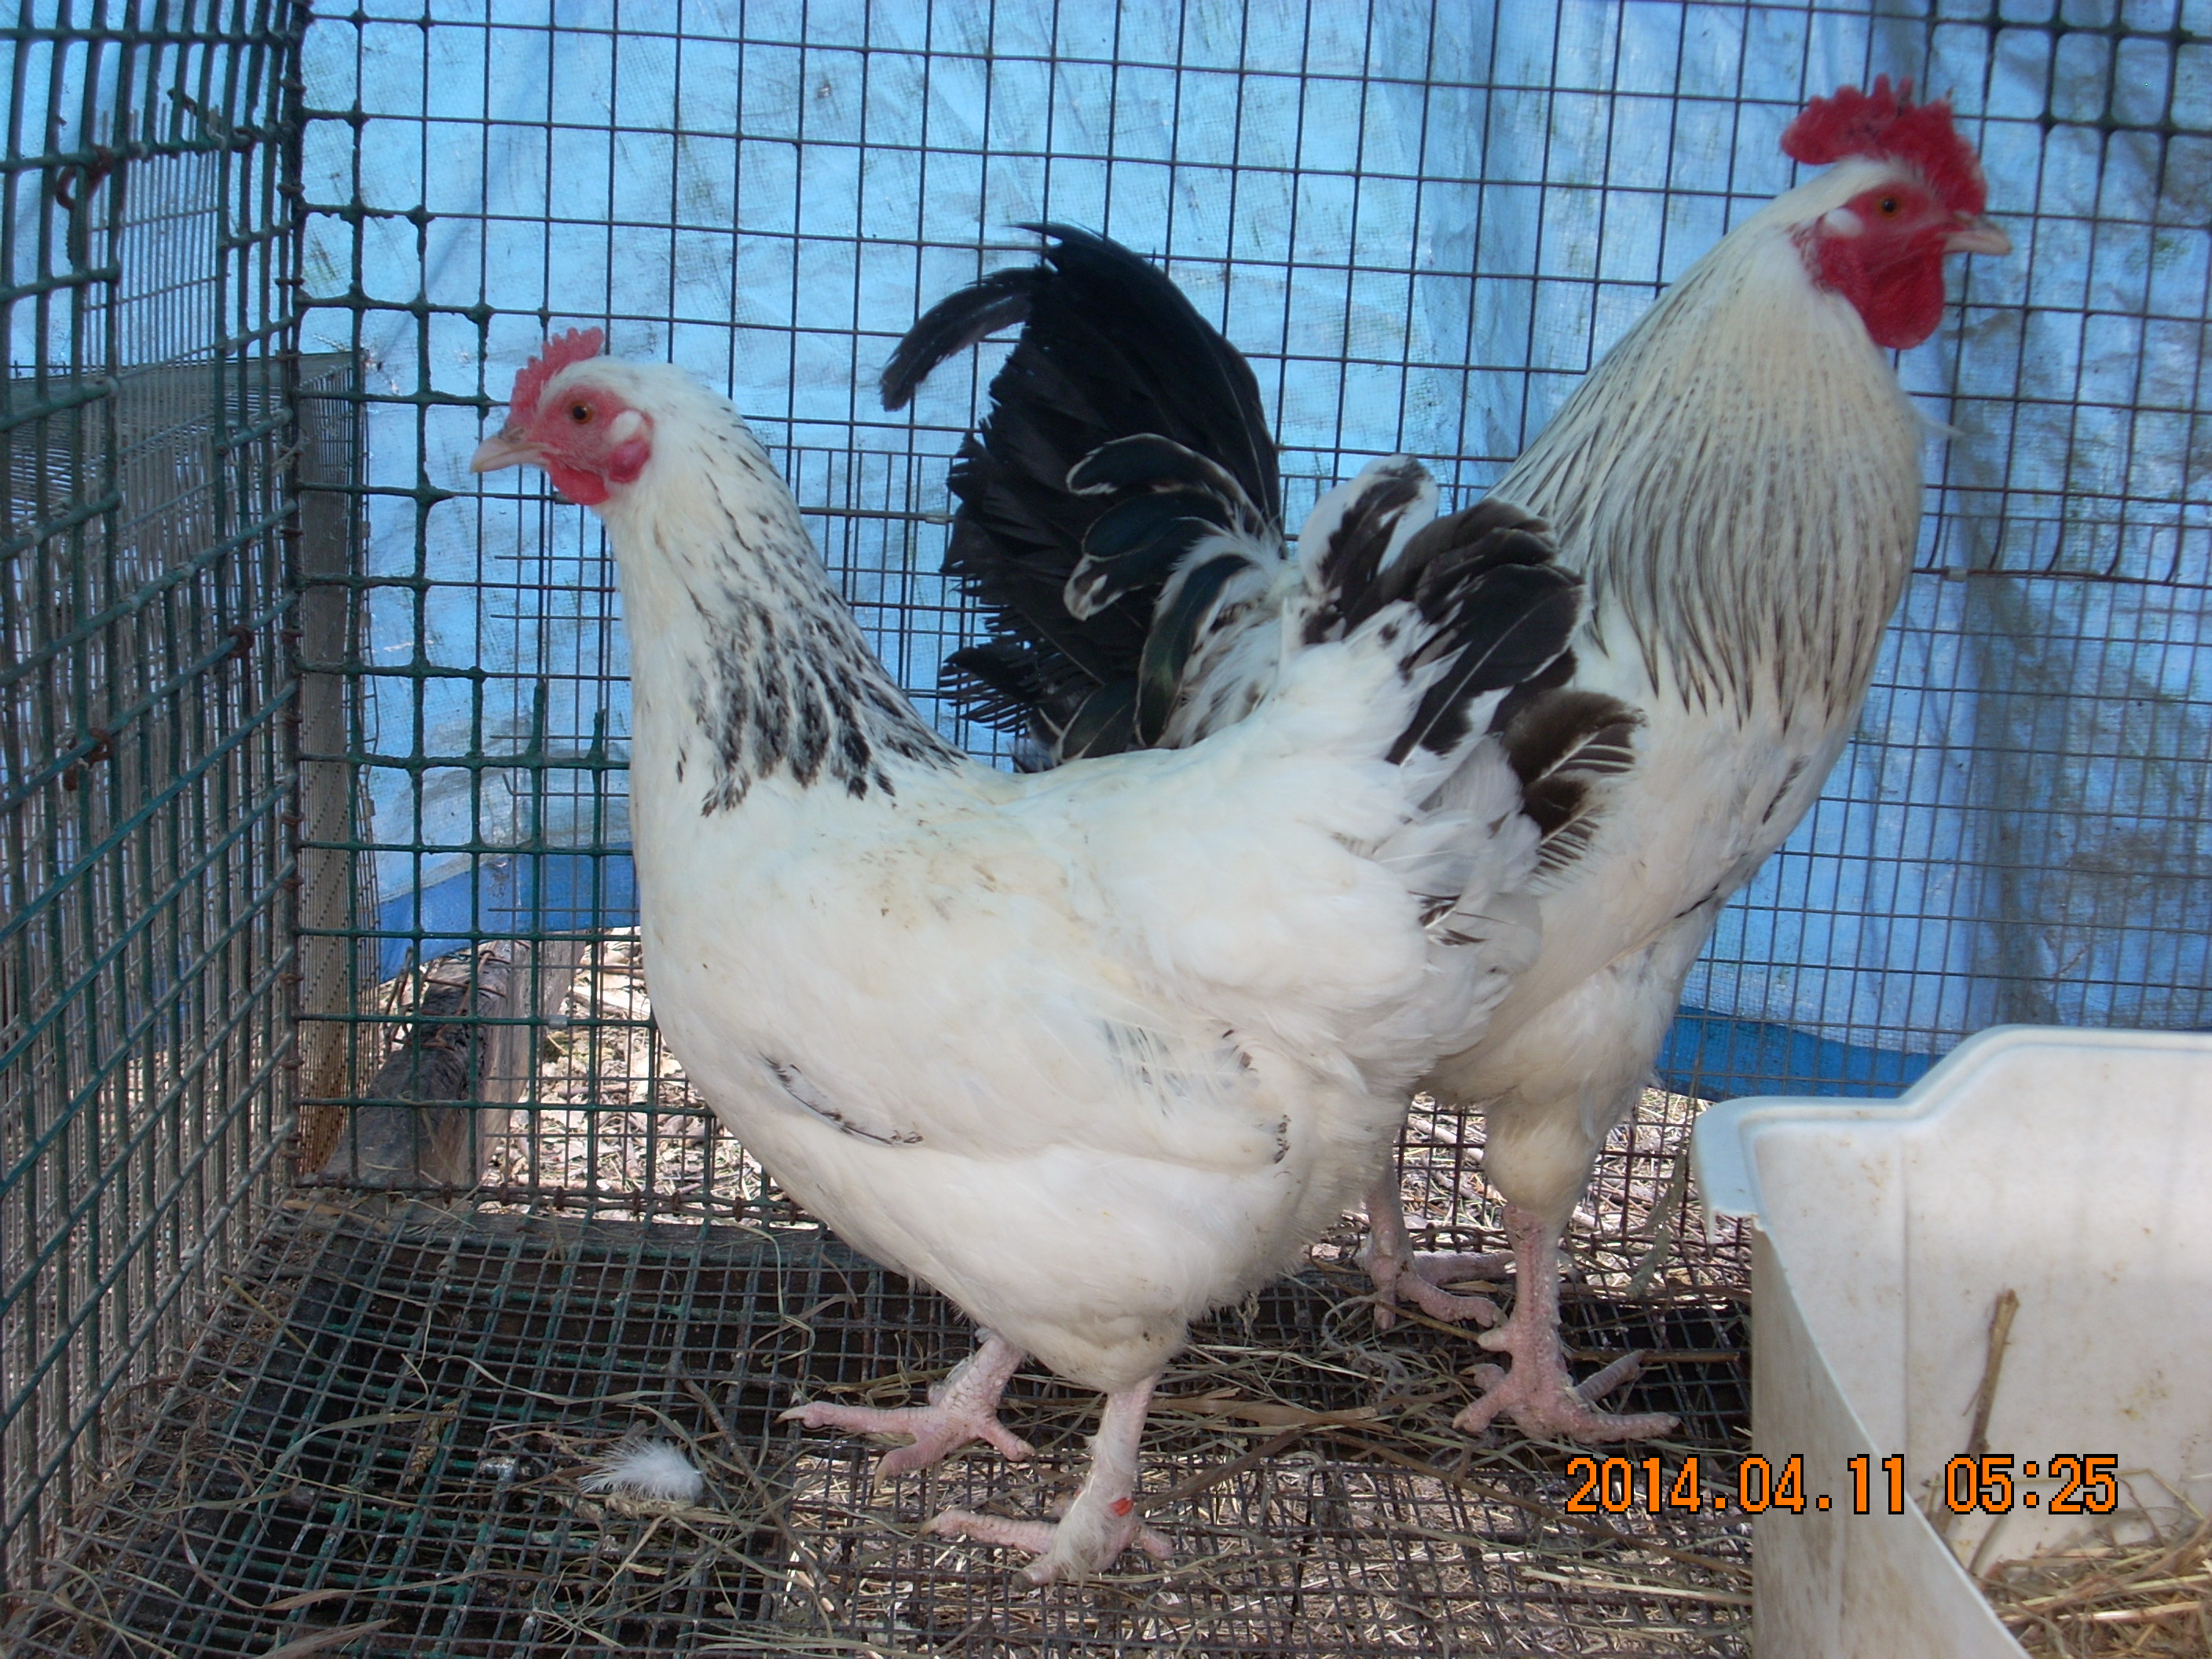 7th generation of breeder taken last year.   Going into the 8th generation this year, 2015.  Project started in 2008.  And has produced some nice looking Columbian Marans in black and blue Coronations.  Egg color is between a 4 and a 5.  But some individuals lay lighter and darker each generation.